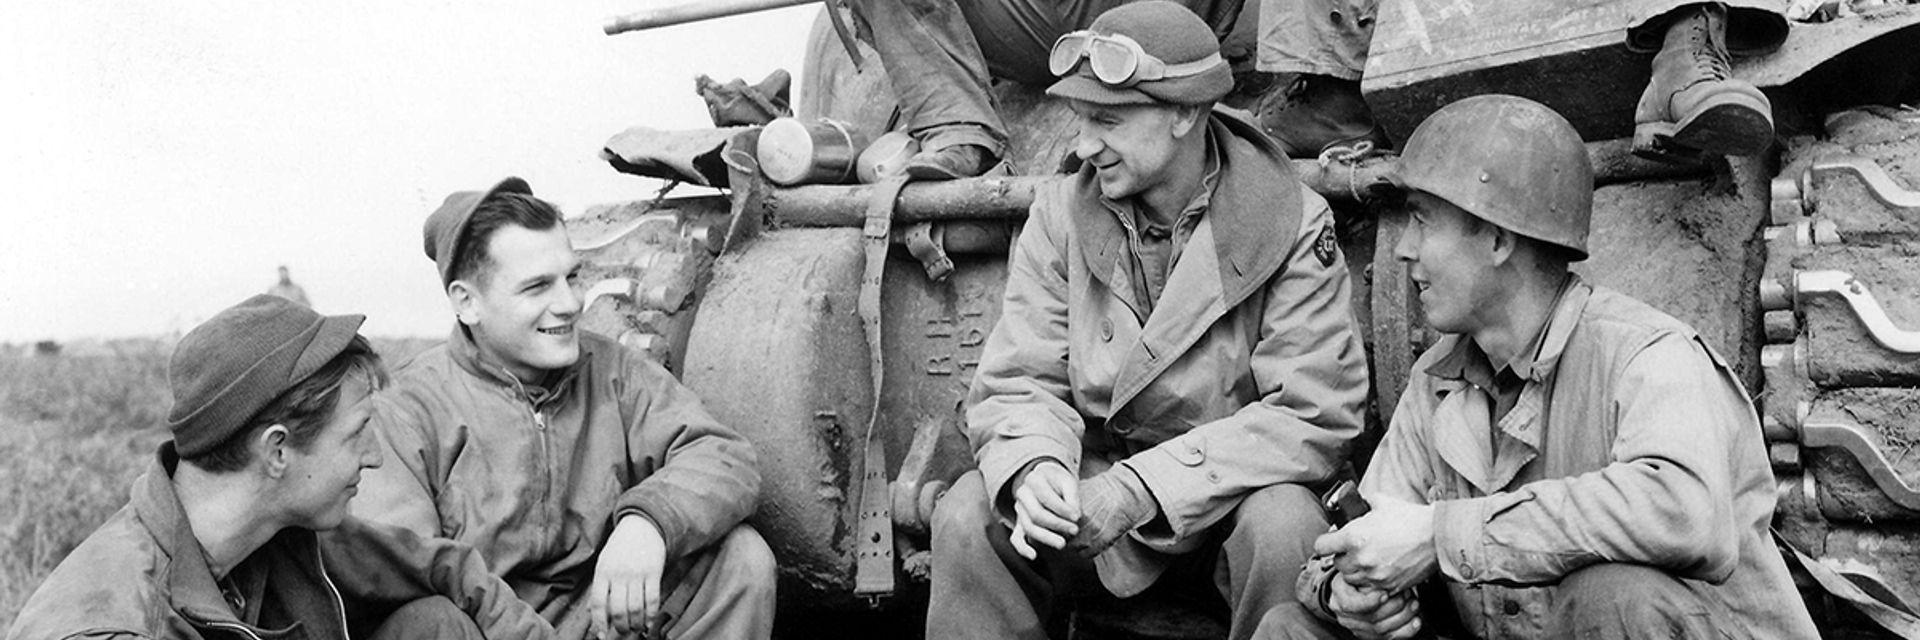 Ernie Pyle and A&#46;J&#46; Liebling&#58; The Sacrifice of Two Writers Who Remade War Reporting